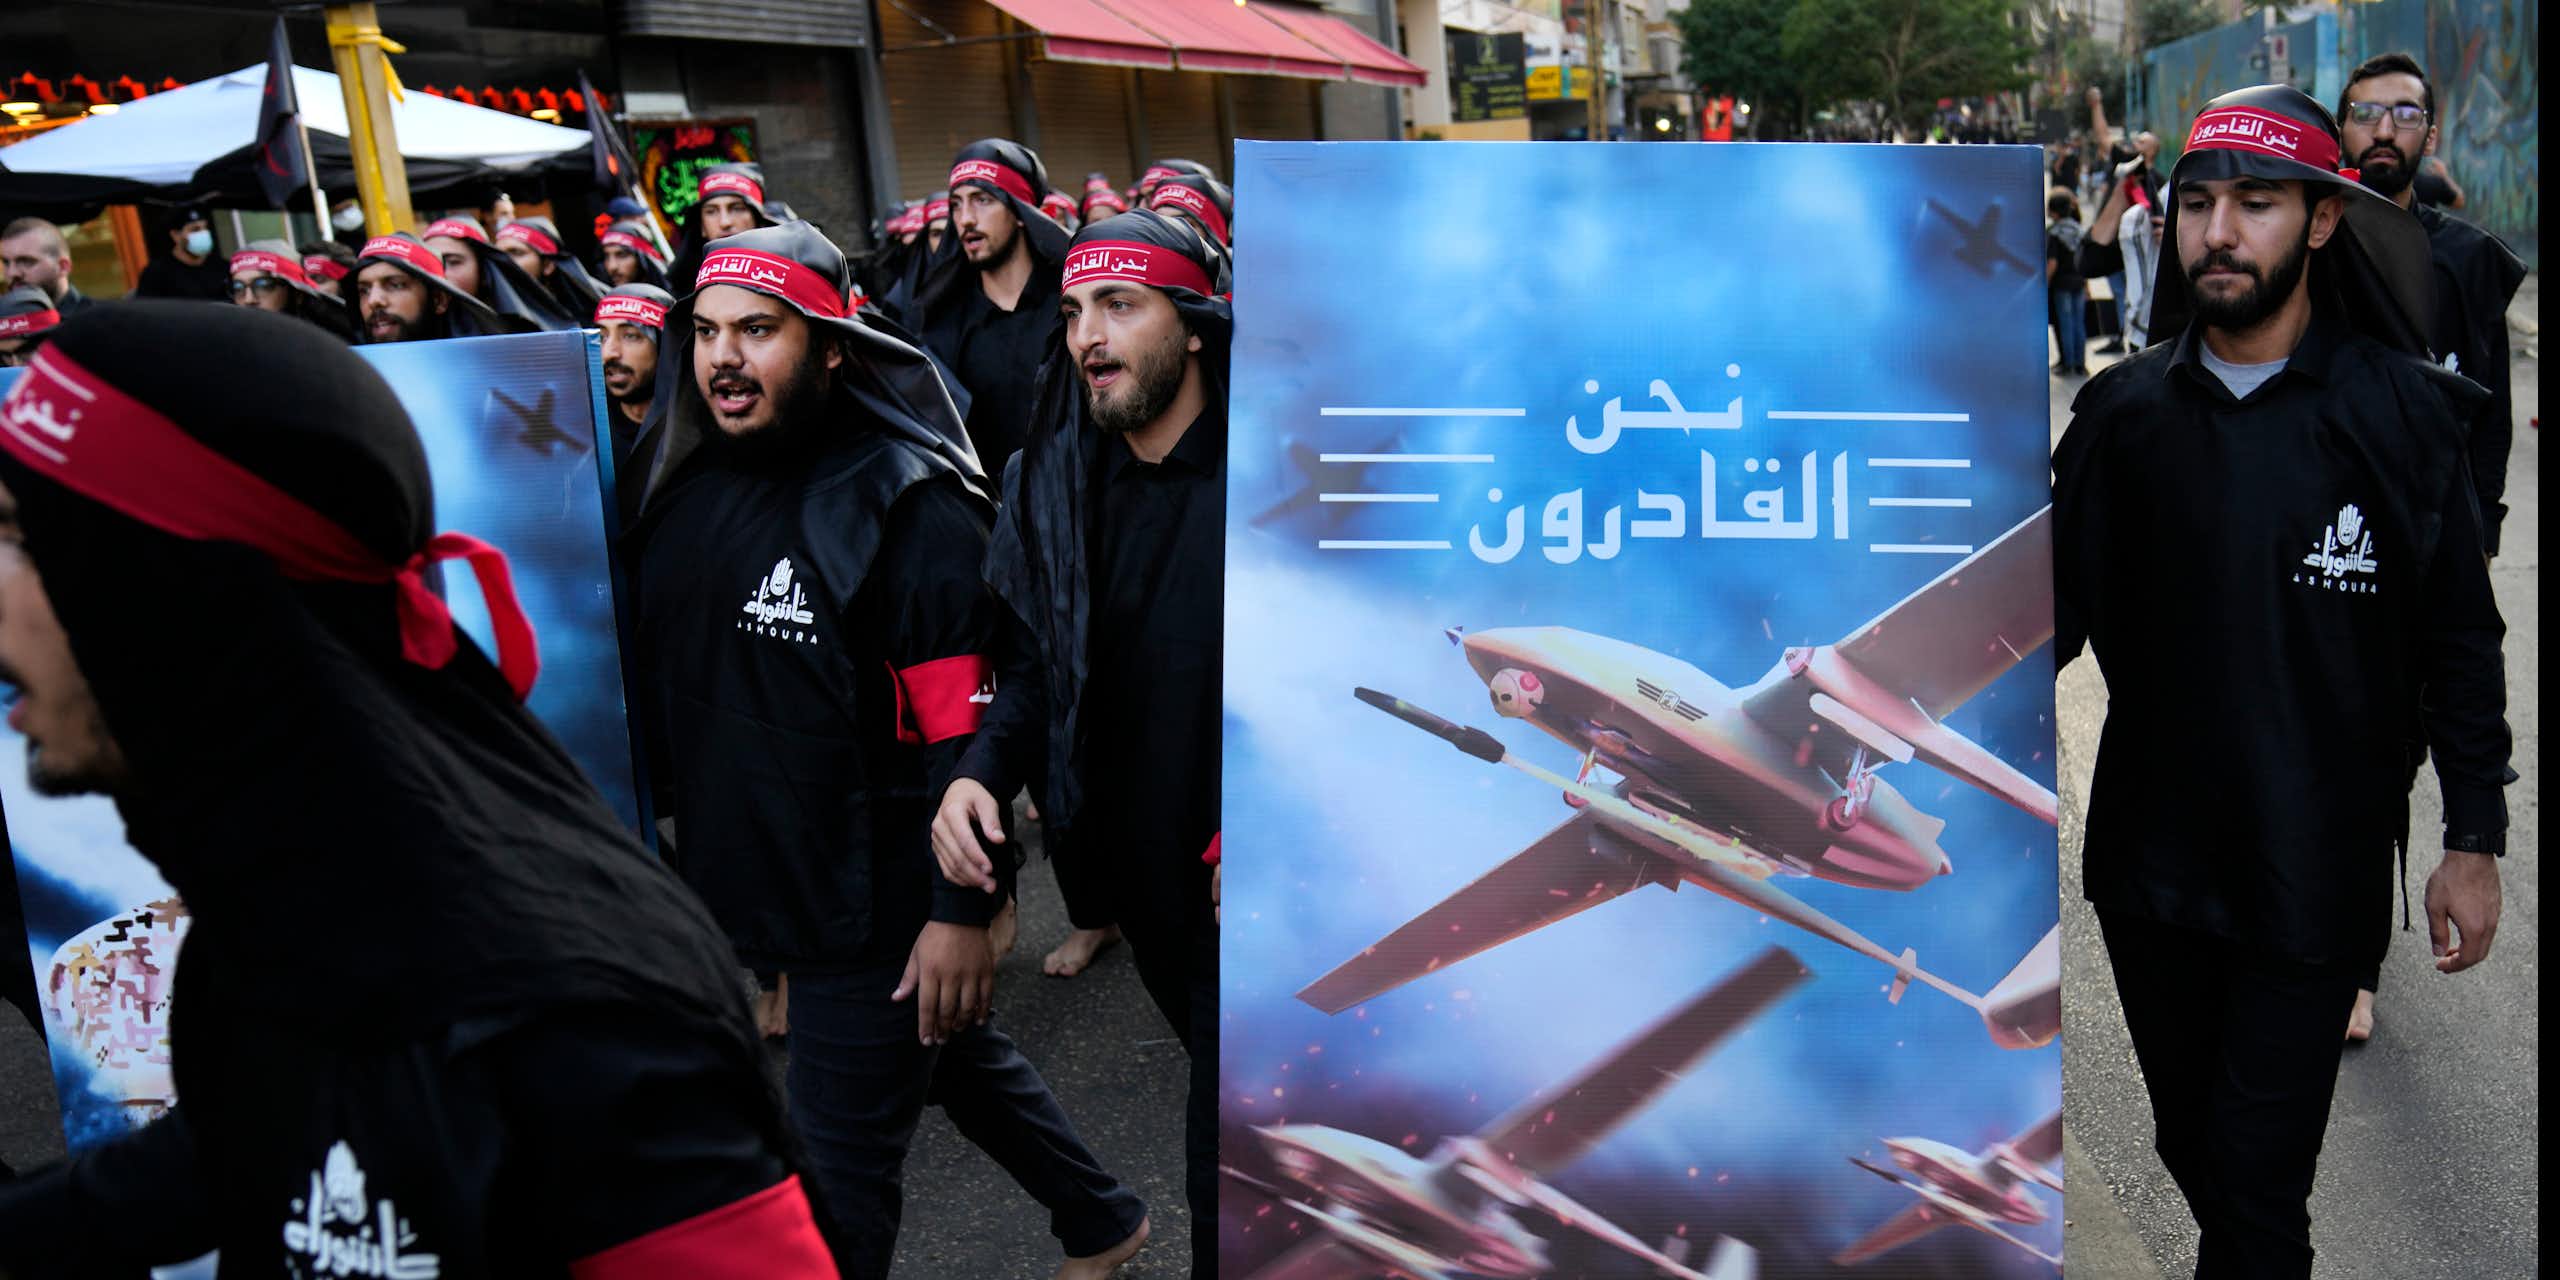 Men dressed in black wearing red headbands walking with a poster featuring a drone and Arabic writing